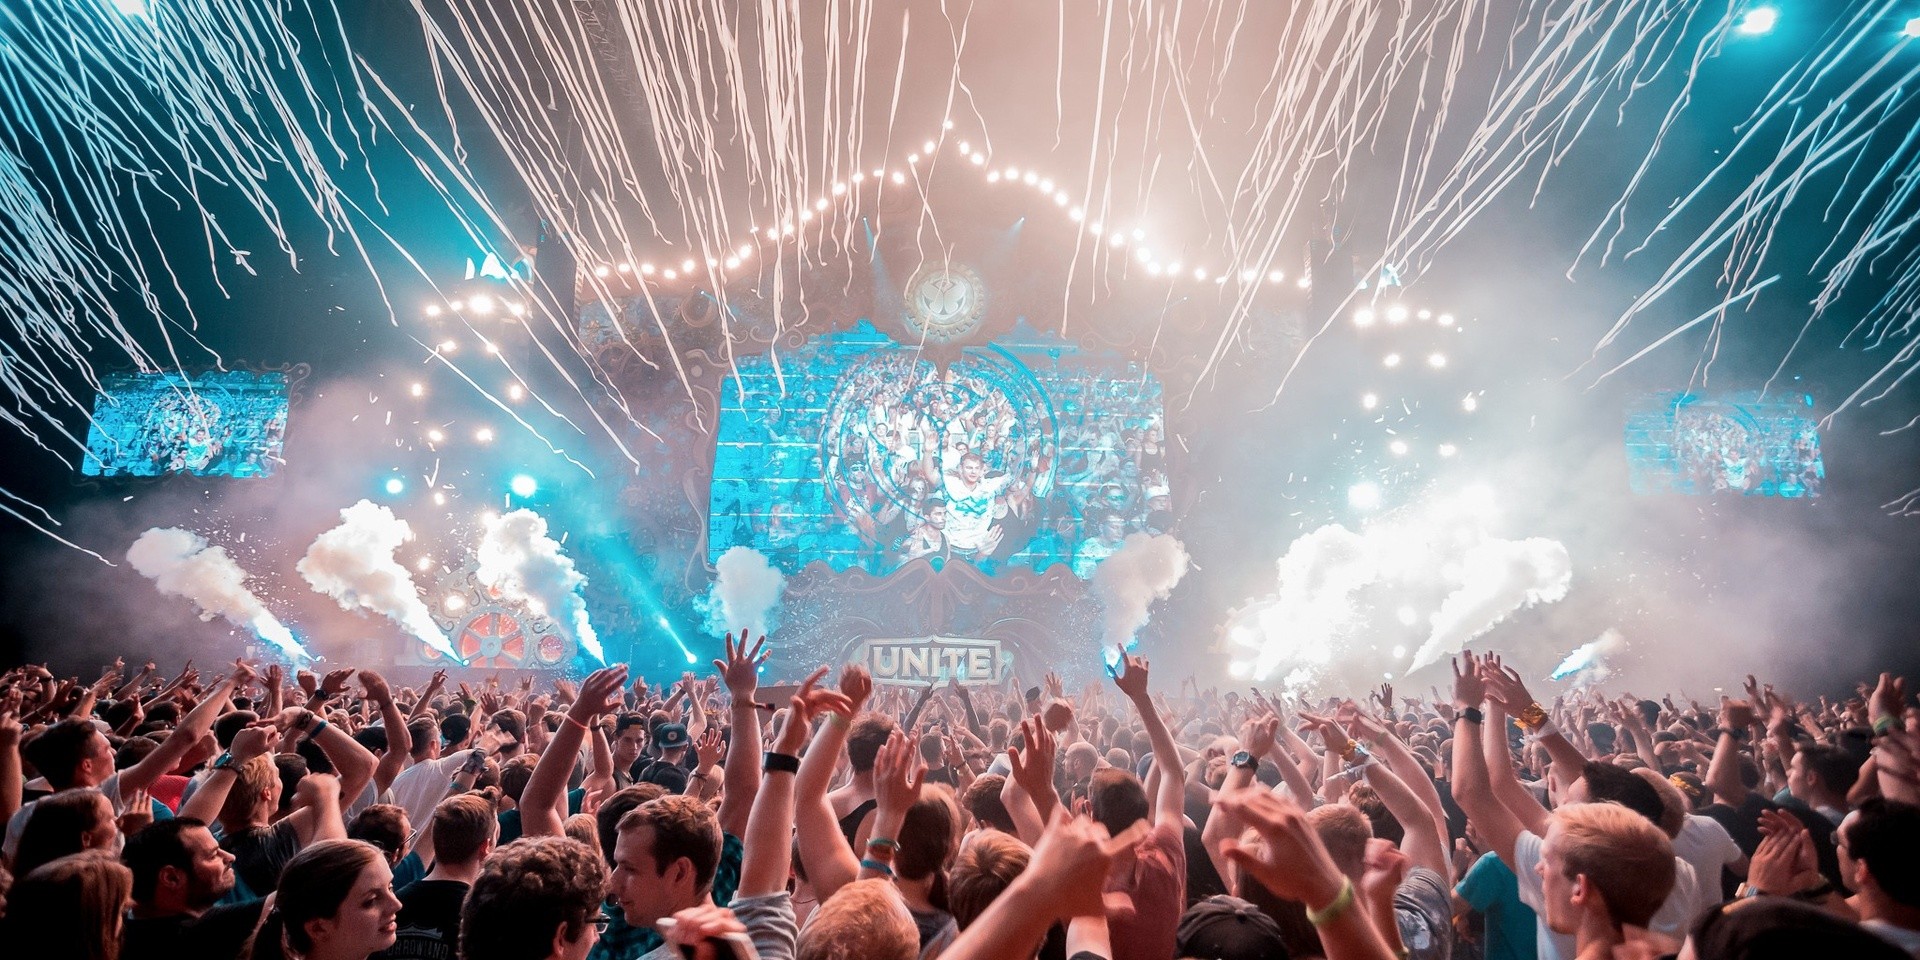 Tomorrowland will live stream their festival in the most ambitious way possible